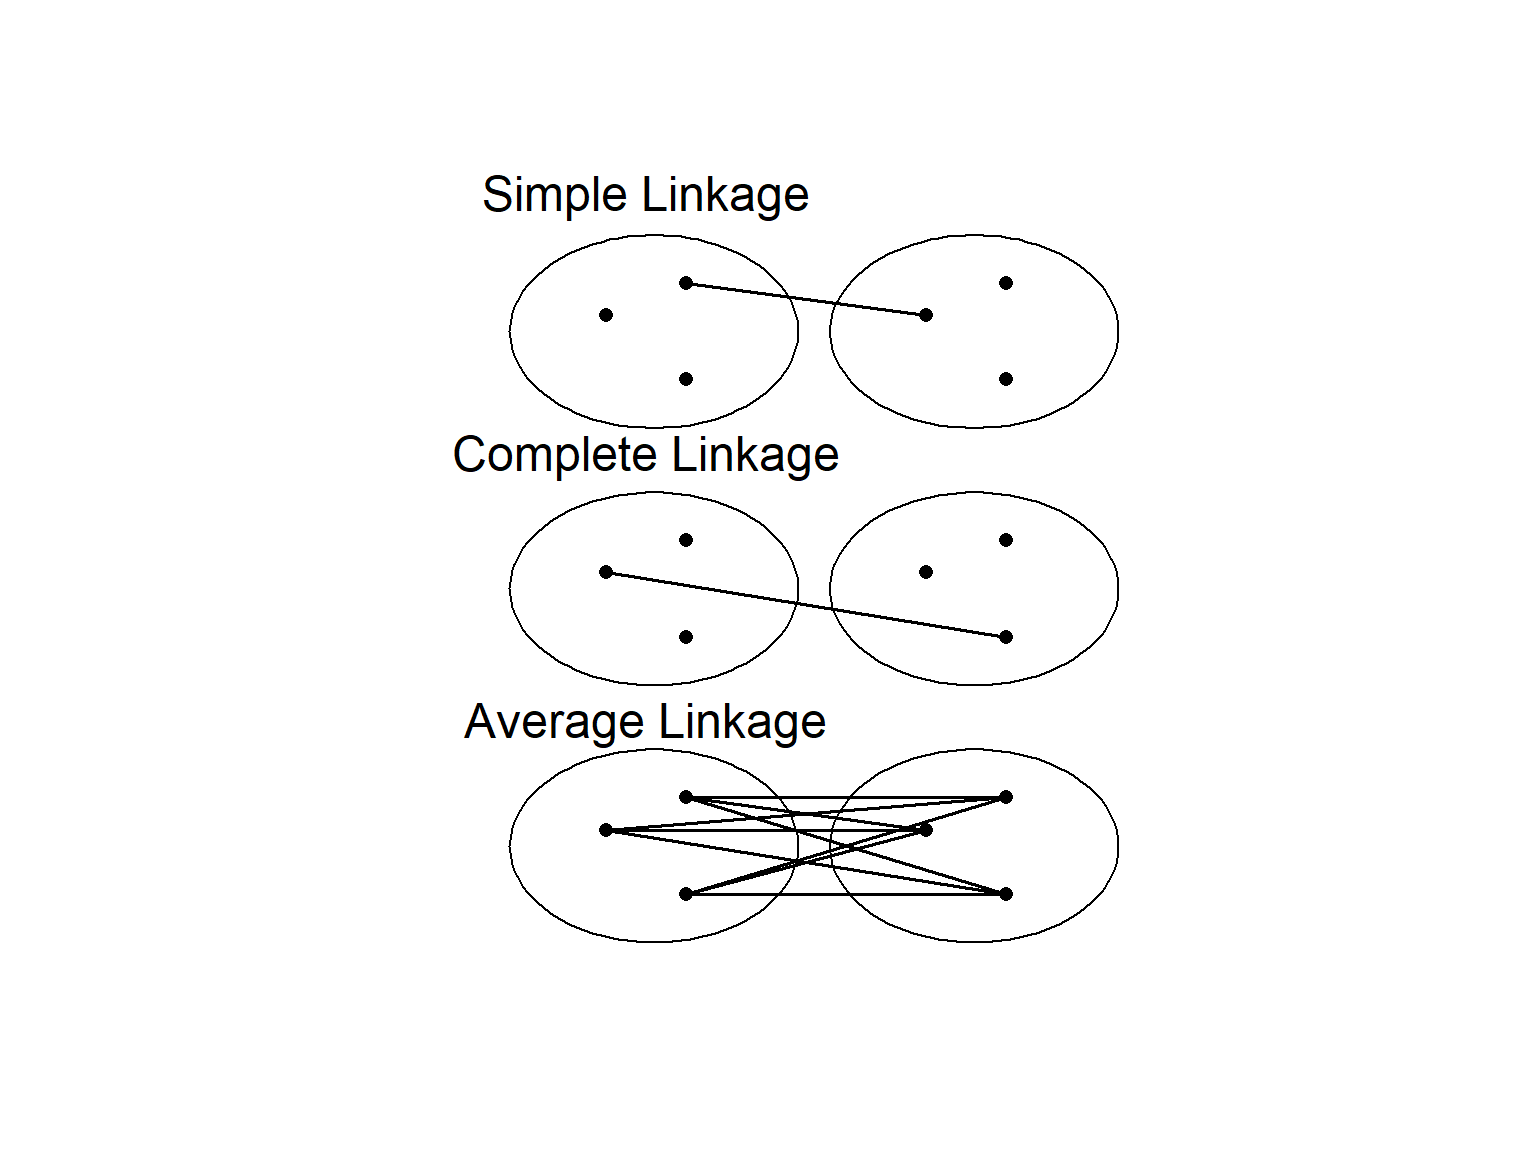 Six ovals arranged in three rows and two columns labelled 'Simple Linkage', 'Complete Linkage', and 'Average Linkage'. Each contain three dots with the first and second connecting a single dot from each oval with a line and the third row connecting all dots in each oval with many lines.